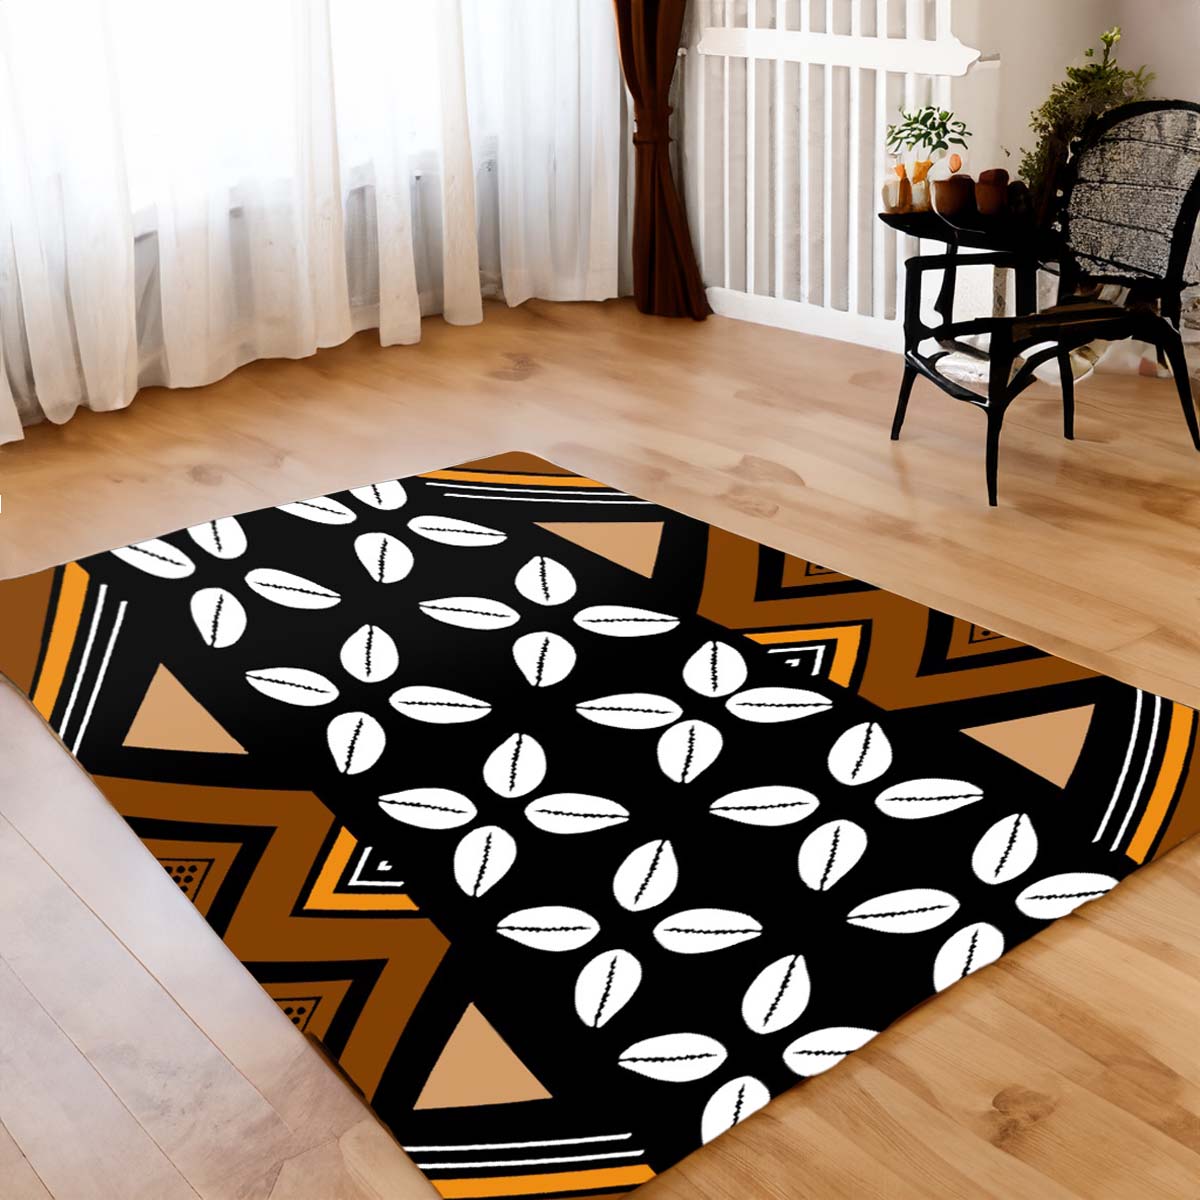 Afrocentric Rugs Tribal Area Carpet Cowrie Inspired - Bynelo